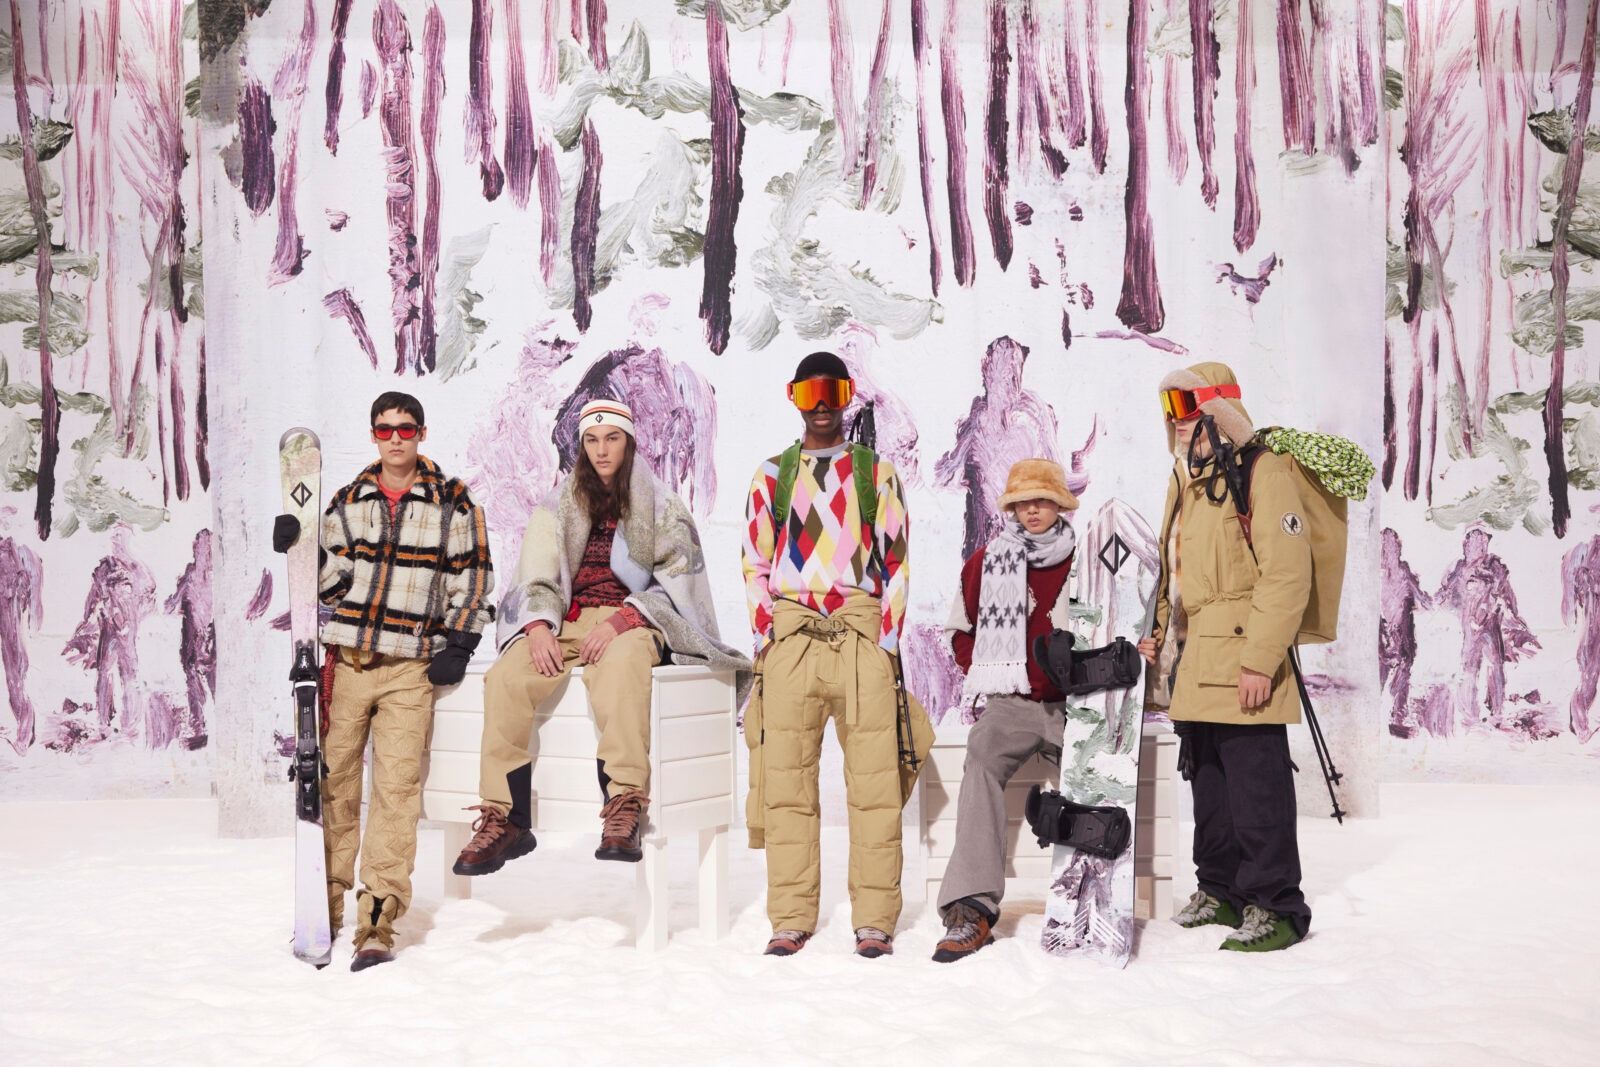 Creative director Kim Jones continues to collaborate with Descente and artist Peter Doig on ski-wear. Photo: Dior